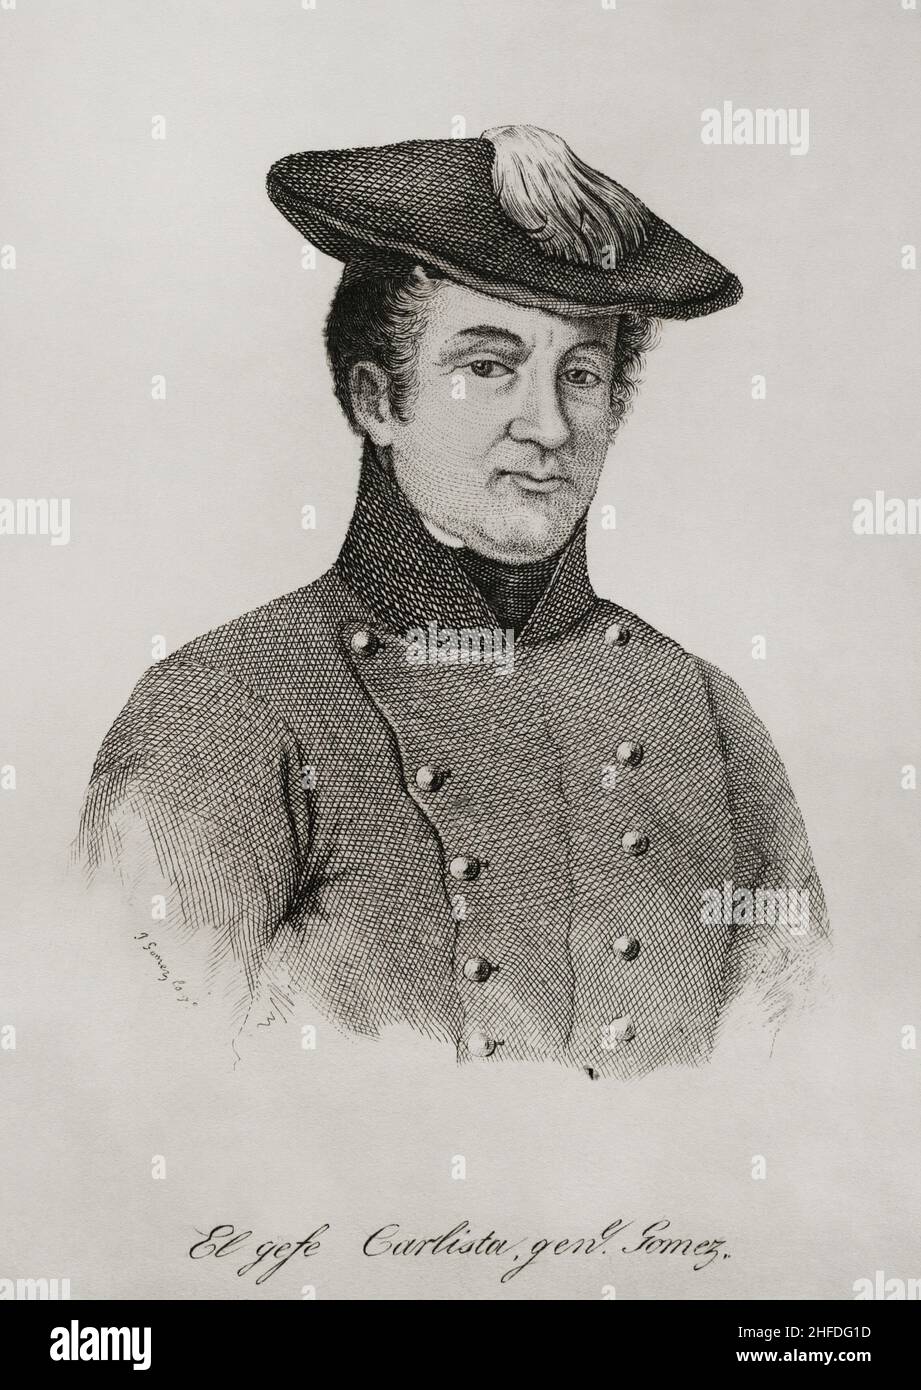 Miguel Sancho Gómez y Damas (1785-1864). Spanish military. He fought on the Carlist side in the first and second Carlist War. Portrait. Engraving. Panorama Español, Crónica Contemporánea. Volume III. Madrid, 1845. Stock Photo